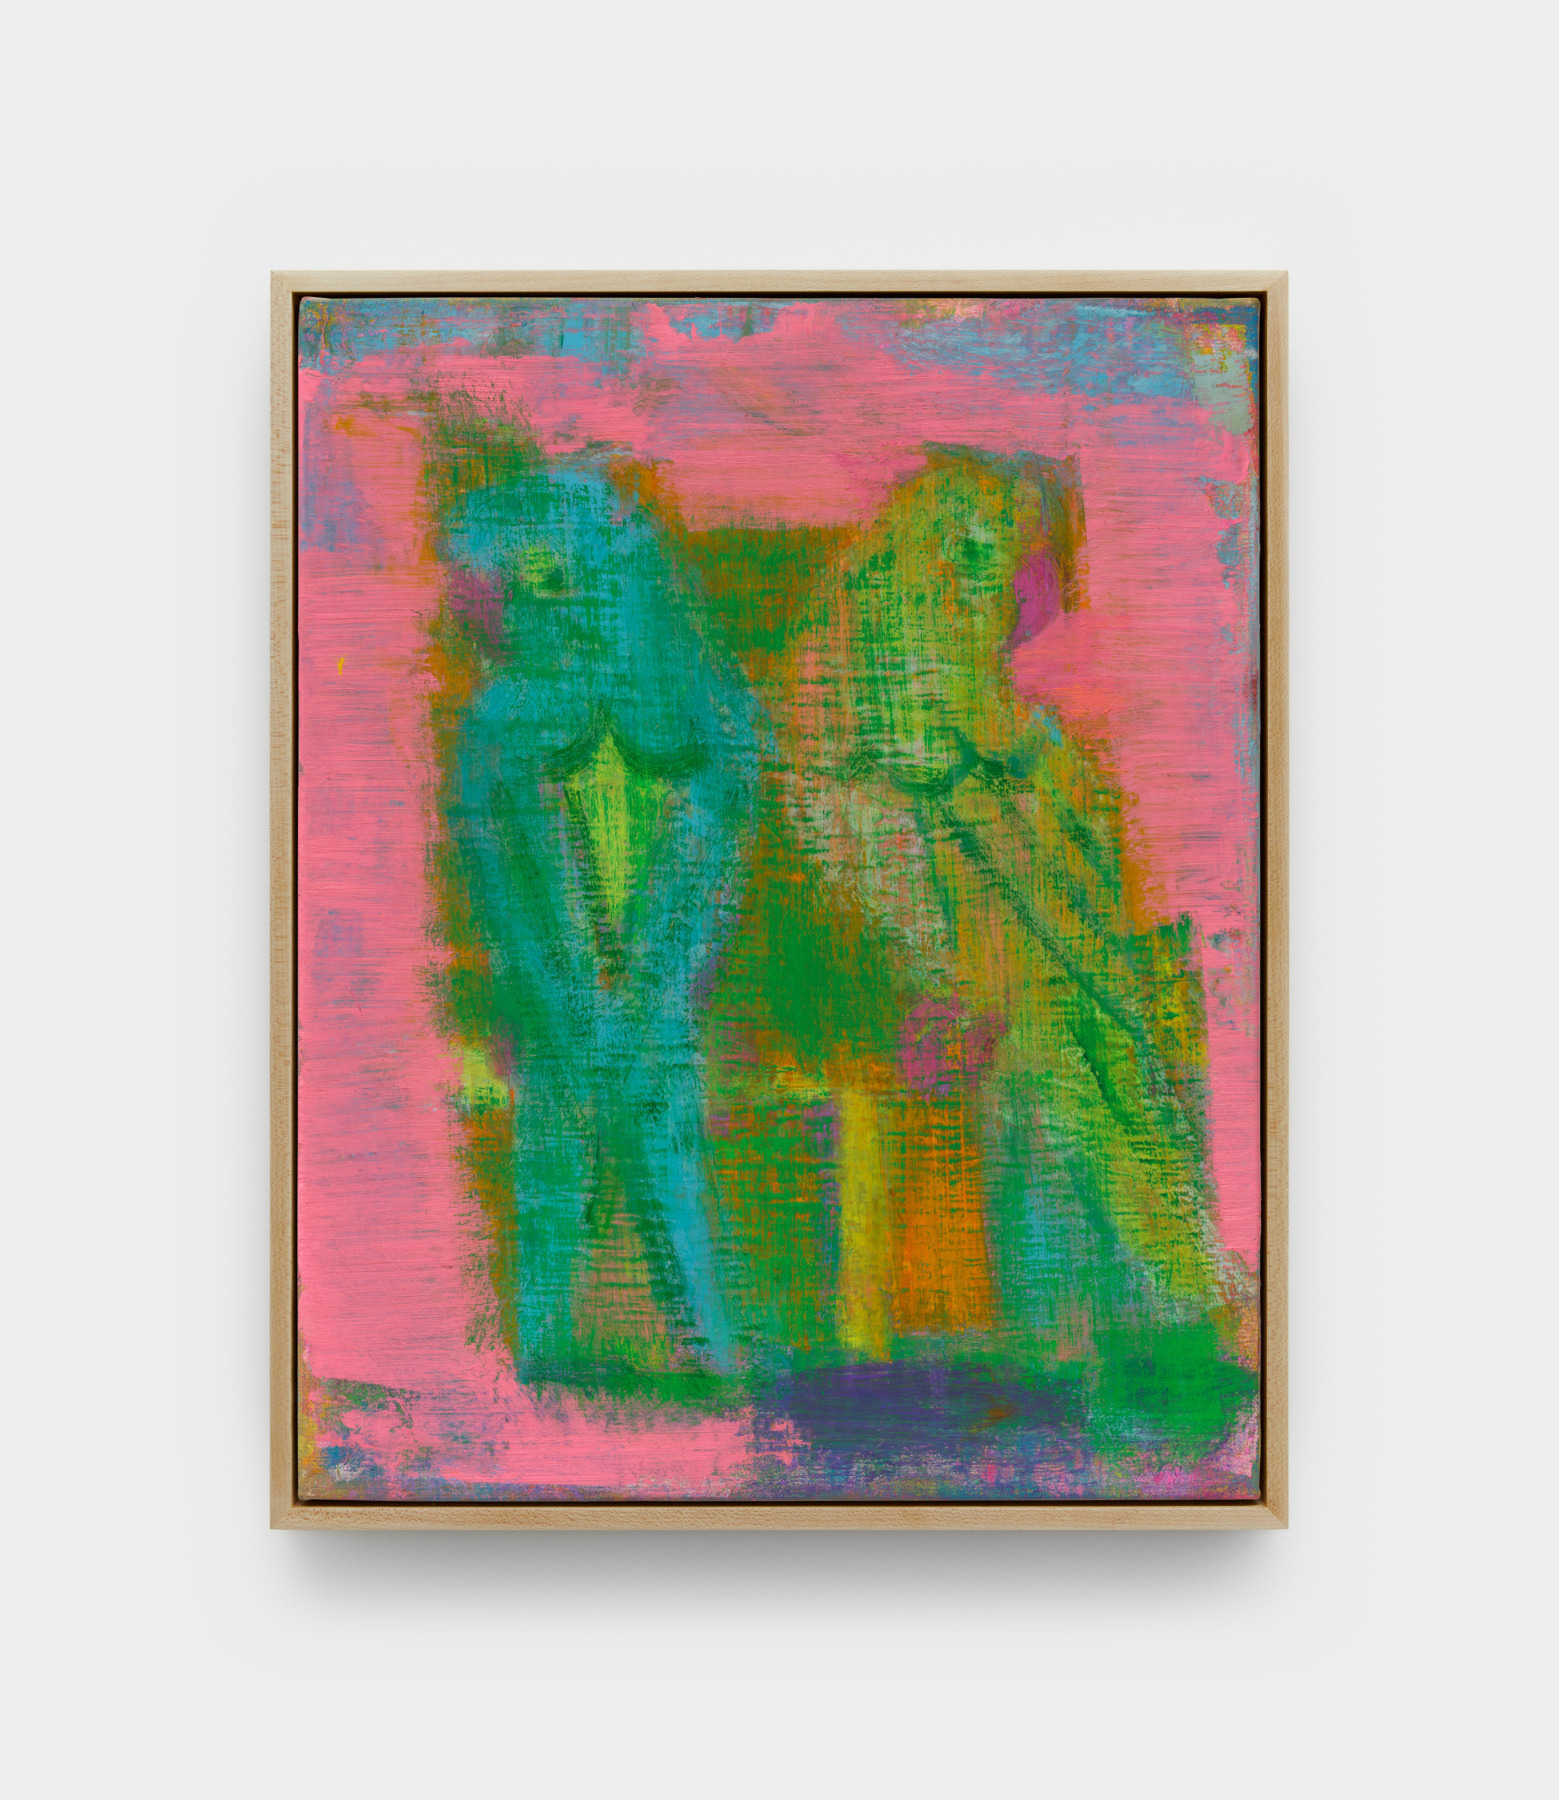 A painting by Michael Berryhill titled "Flirting," which shows two green parakeets facing away from each other against a pink background